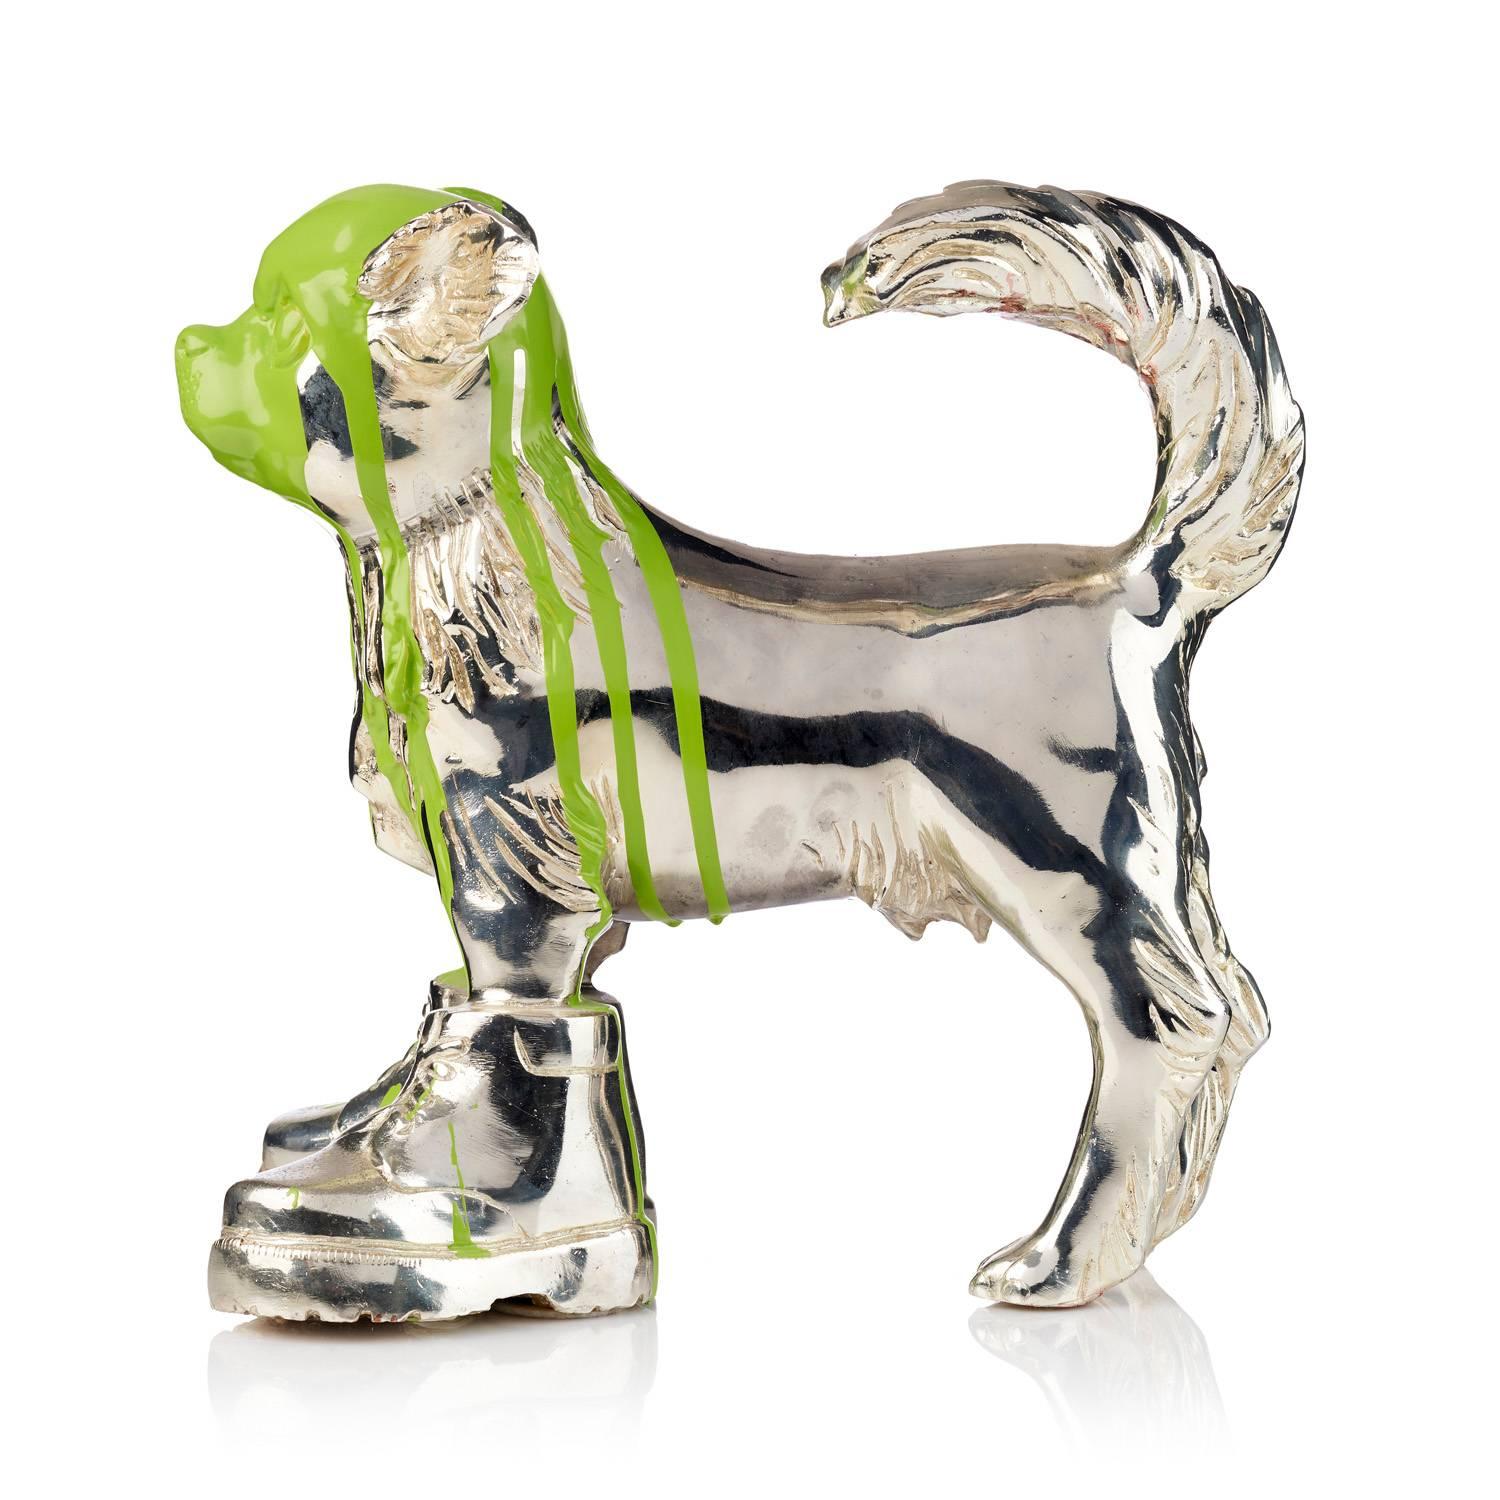 Cloned Chihuahua with colored head green - Pop Art Sculpture by William Sweetlove